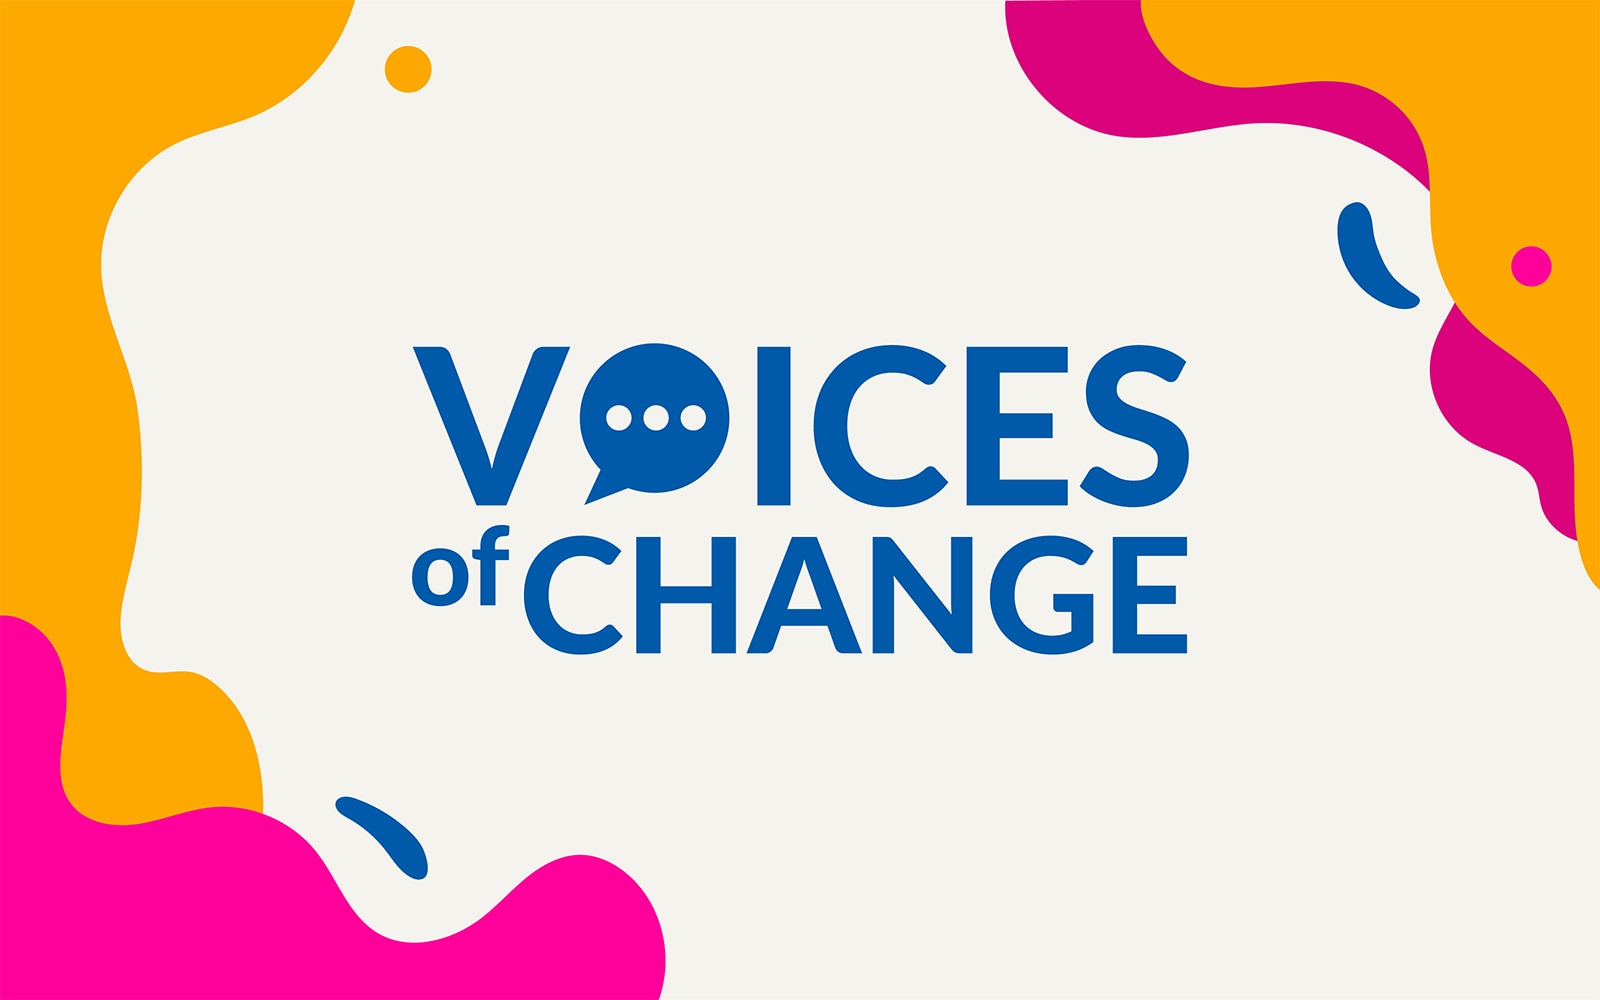 Voices of Change business advice by Philip Morris International employees